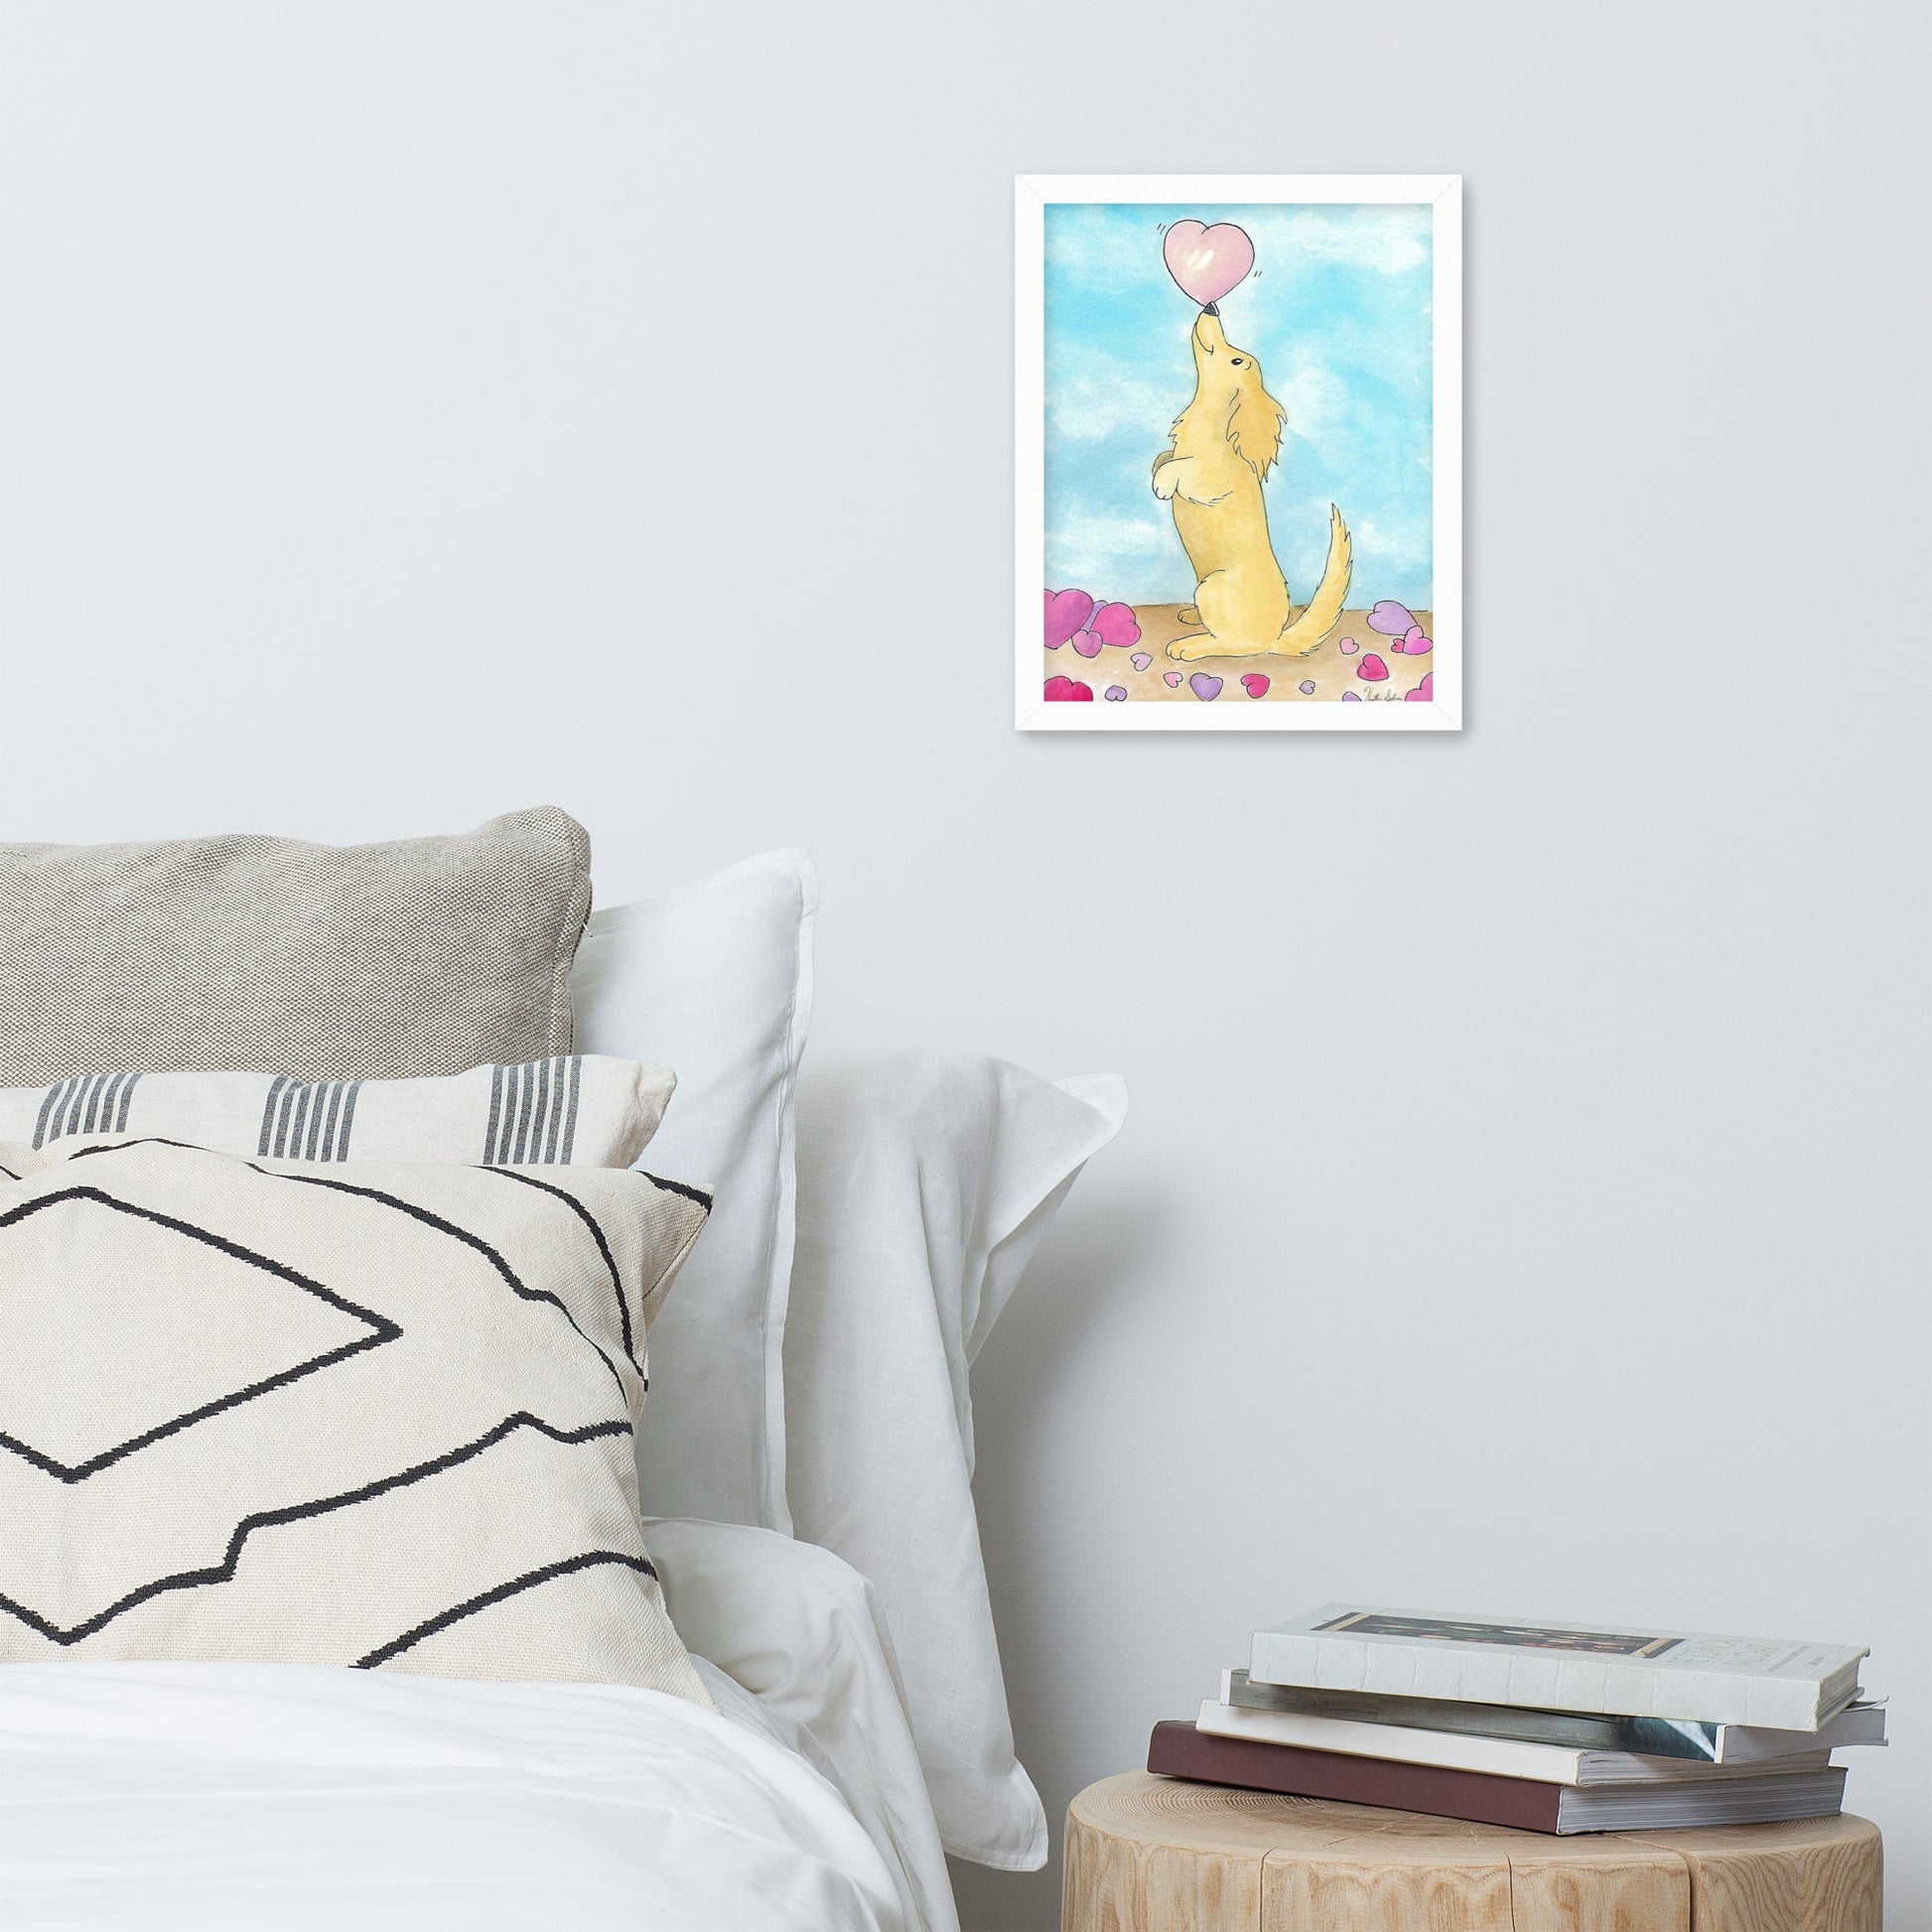 Framed watercolor art print entitled Puppy Love.  11 by 14 inch print in white ayous wood frame. Has acrylite cover to protect the art print. Hanging hardware included. Shown on wall above bed and nightstand.